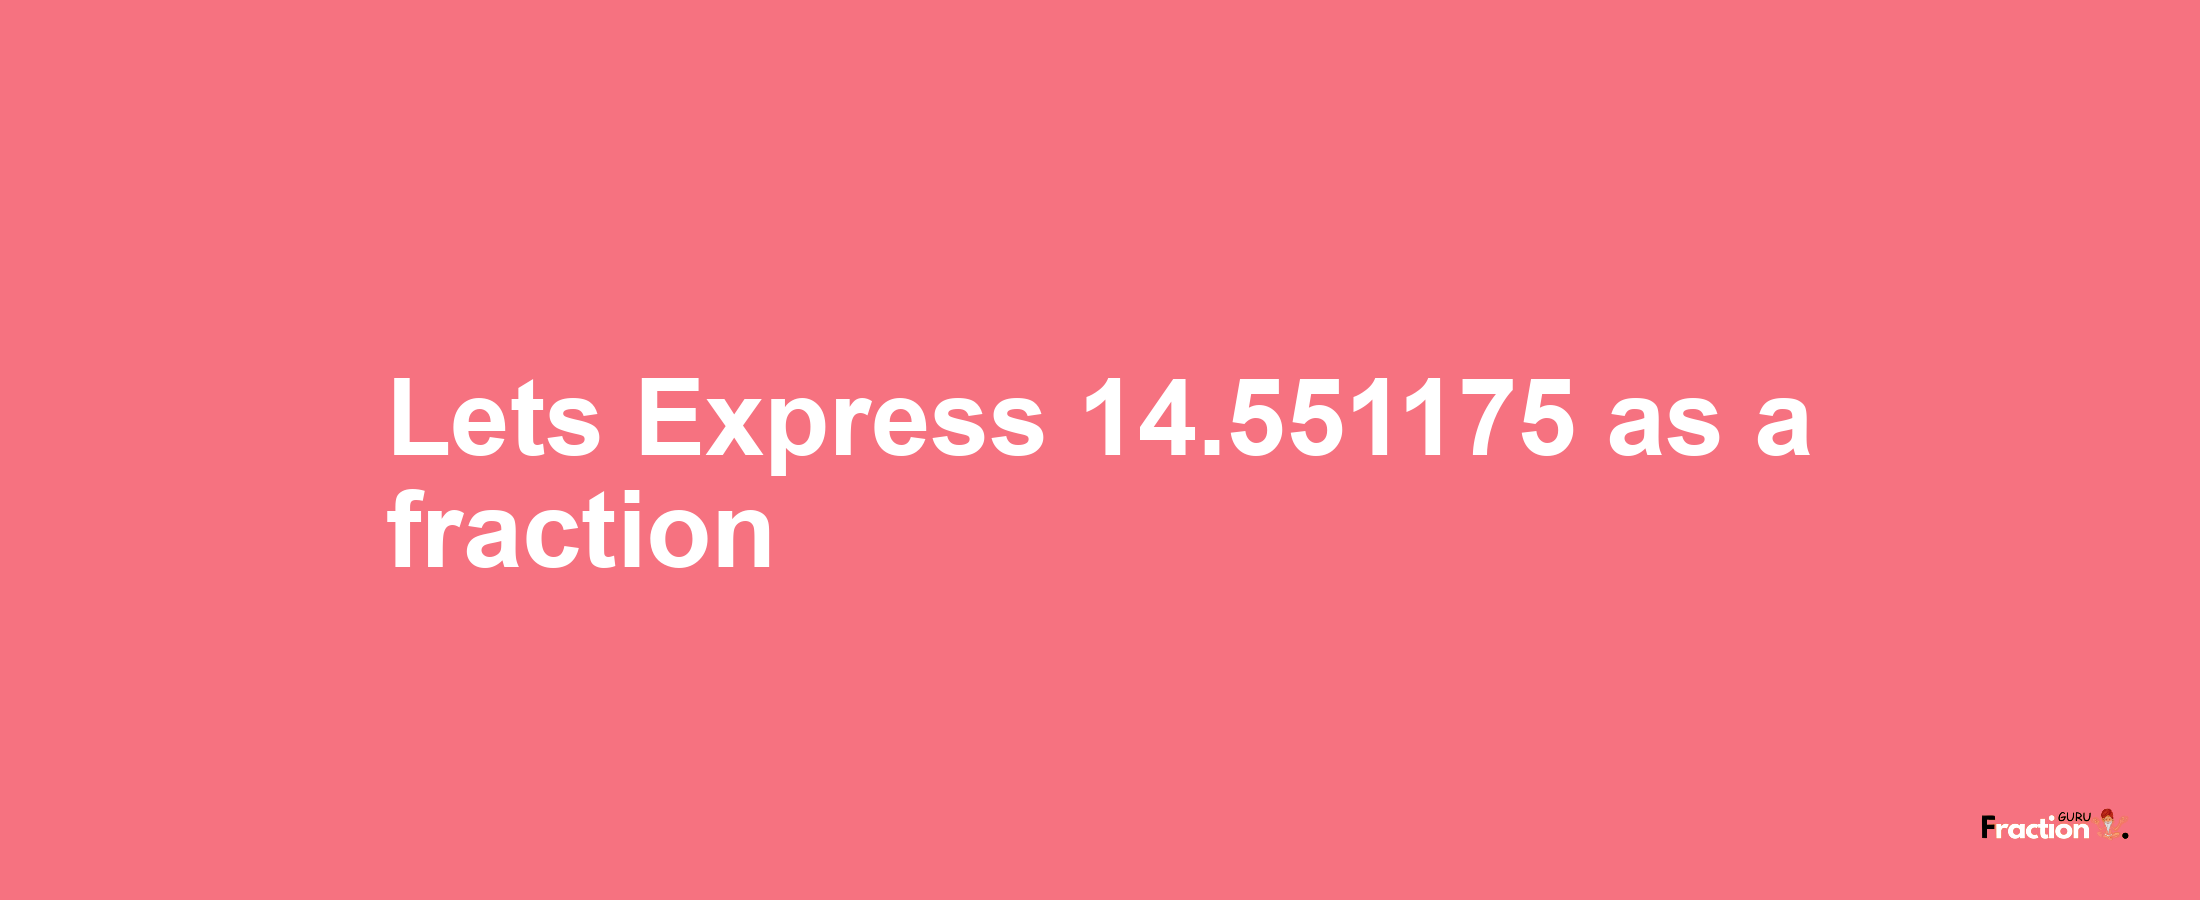 Lets Express 14.551175 as afraction